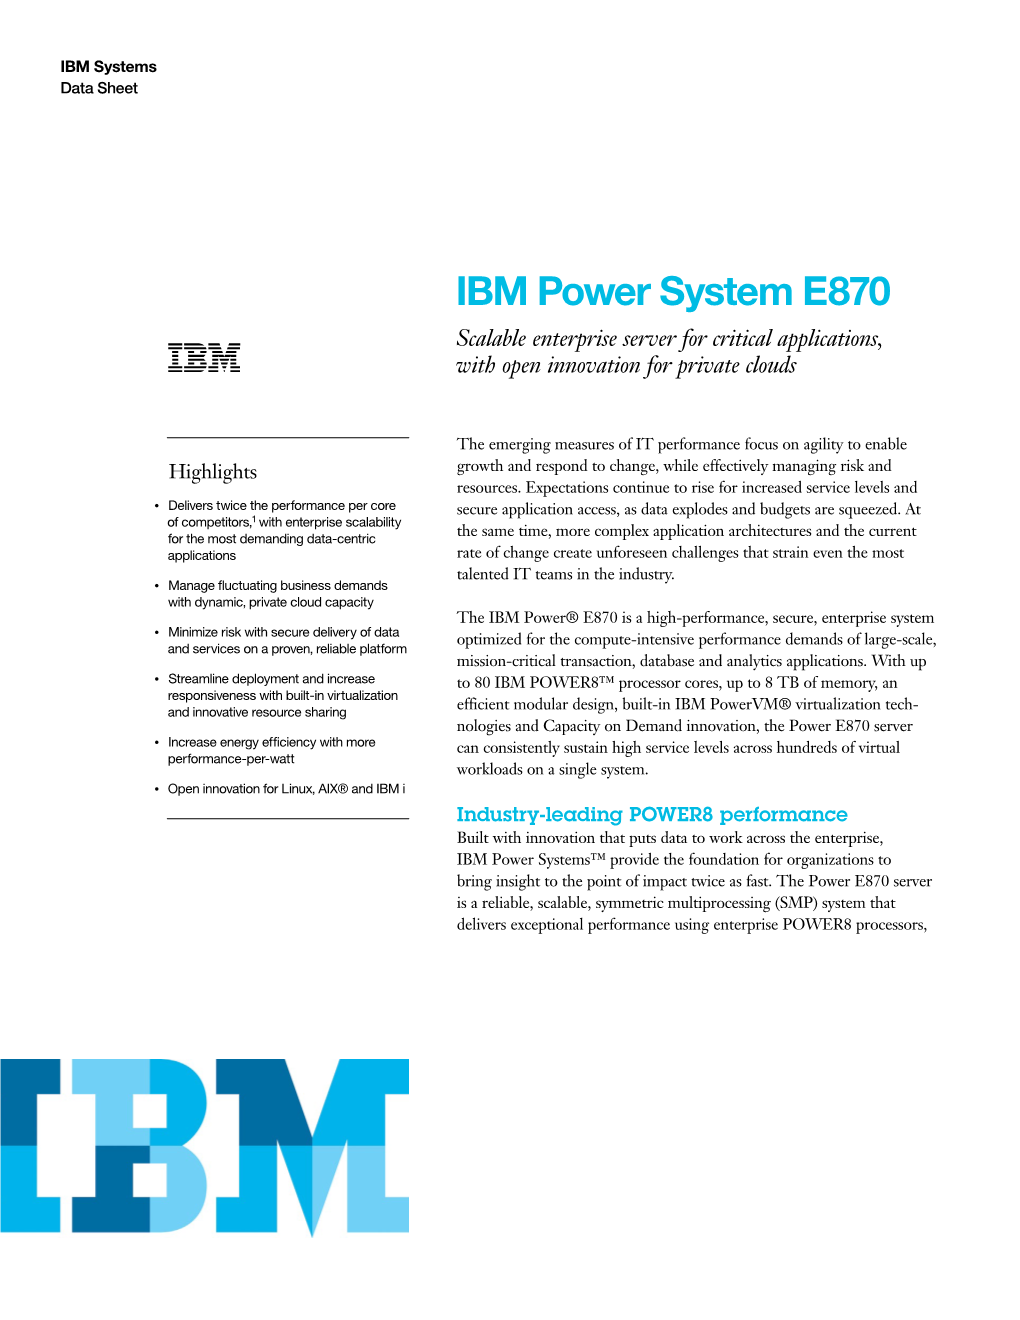 IBM Power System E870 Scalable Enterprise Server for Critical Applications, with Open Innovation for Private Clouds